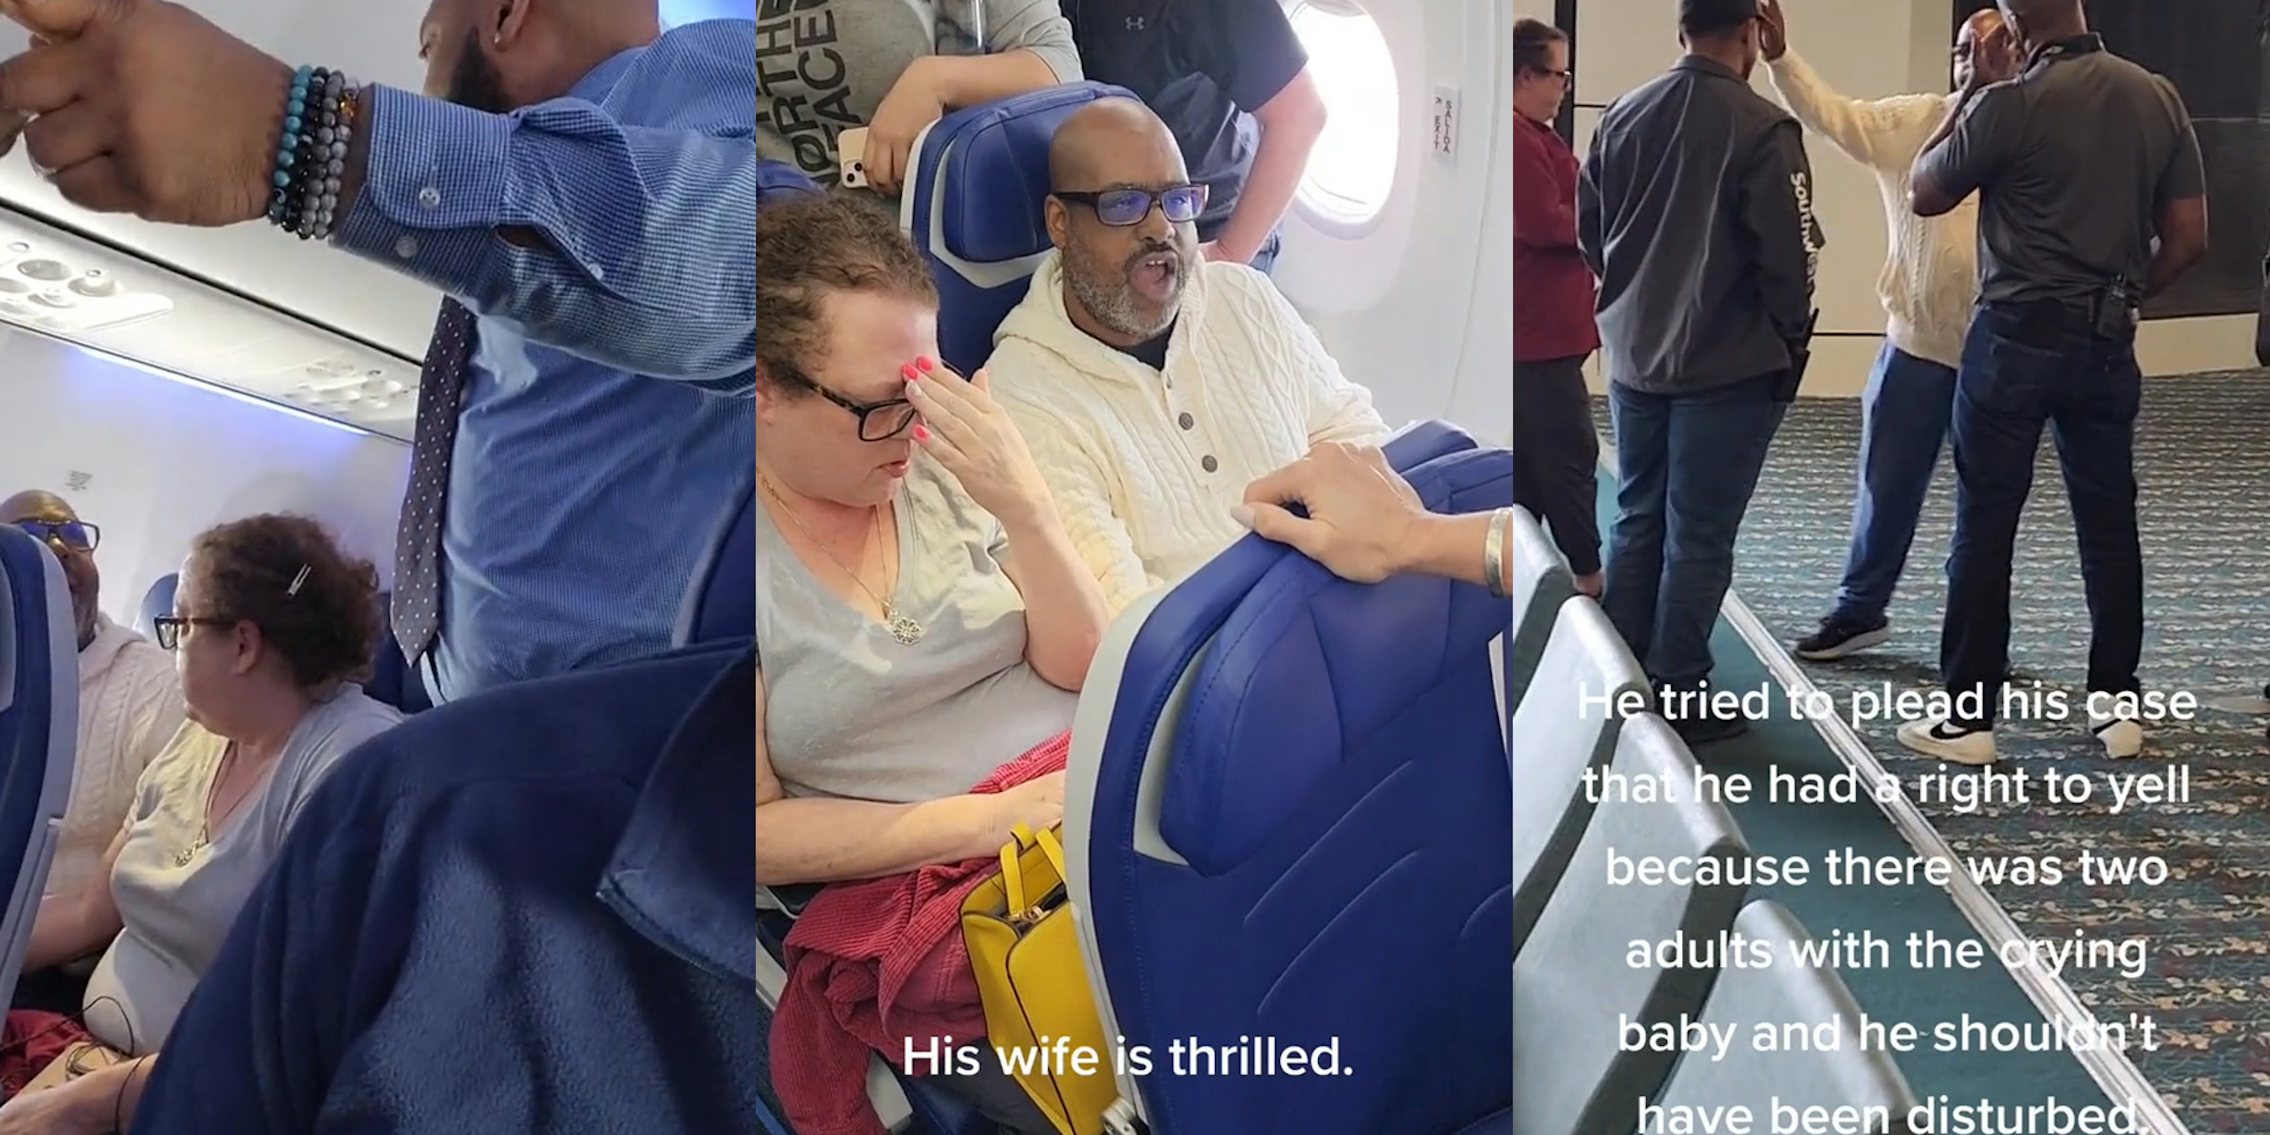 Three screenshots showing the inside of an airplane and a man speaking to police. 